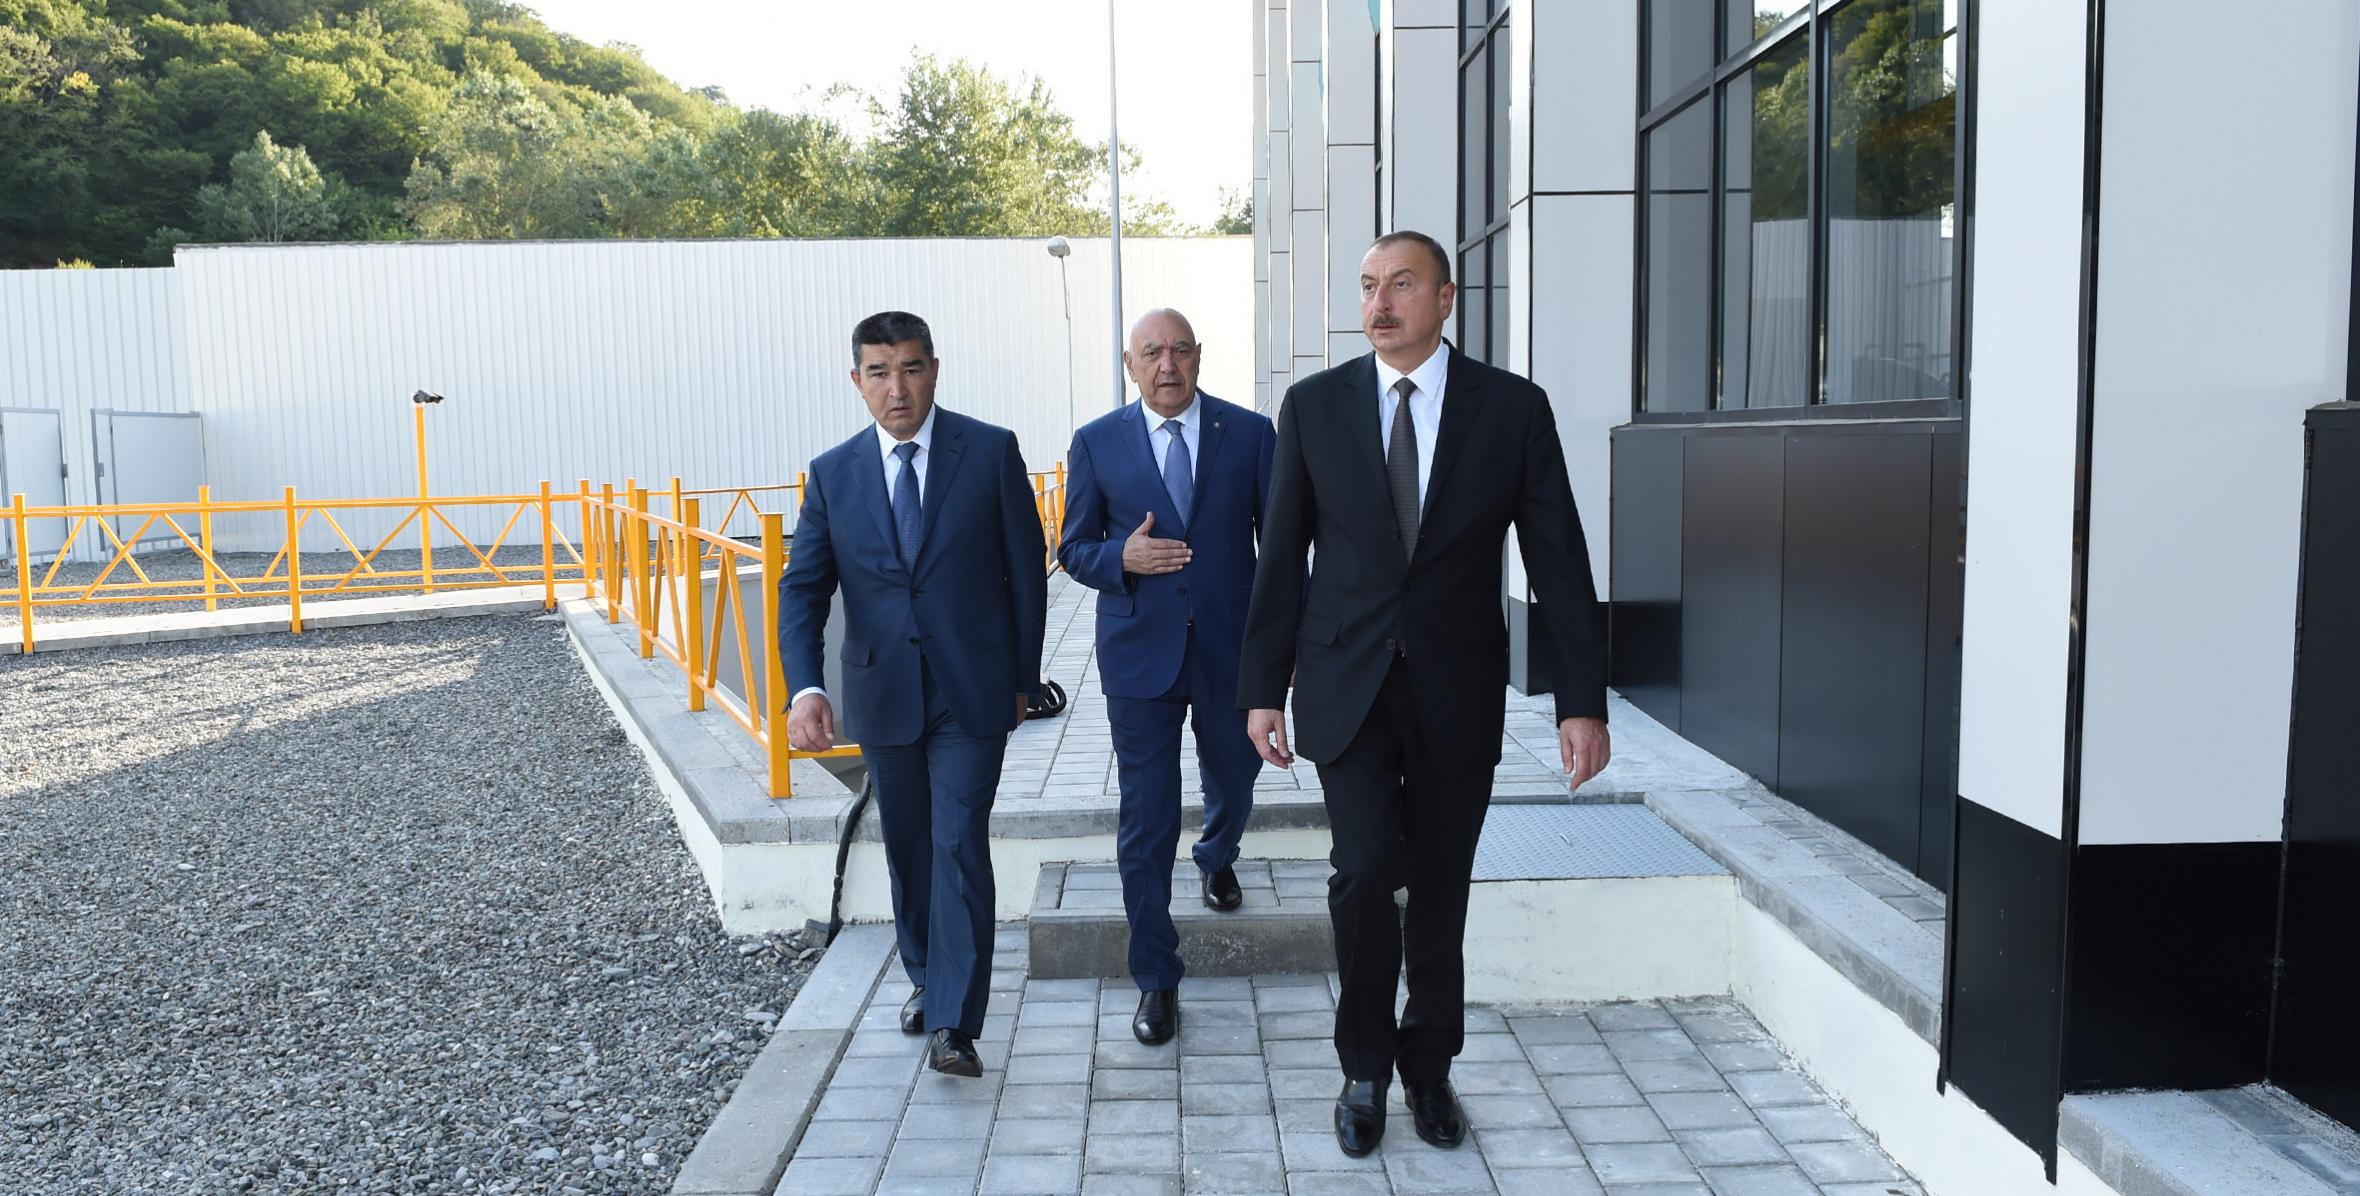 Ilham Aliyev attended opening of “Ismayilli-2” hydroelectric power plant